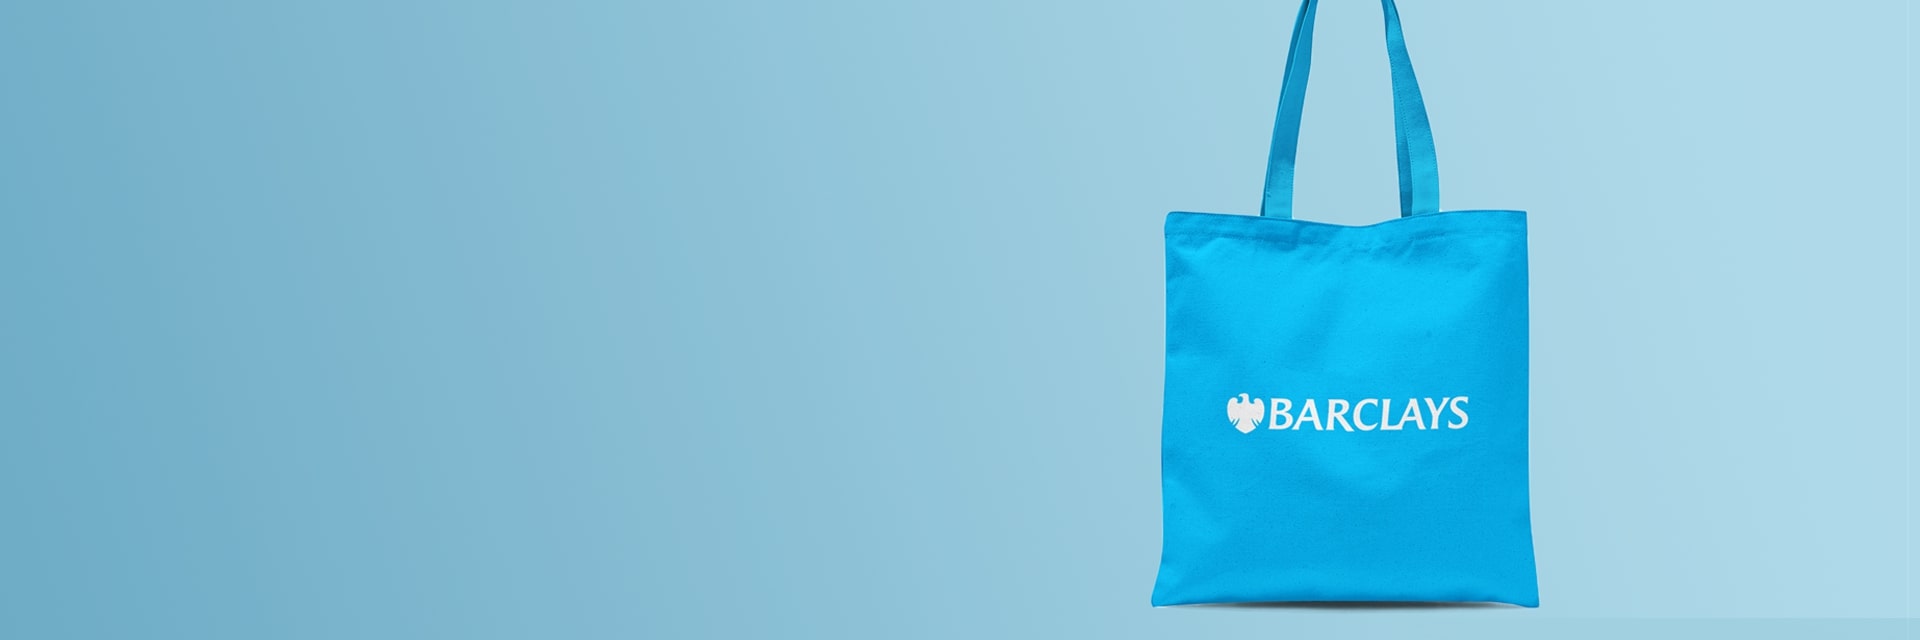 Tote bags. Done right.